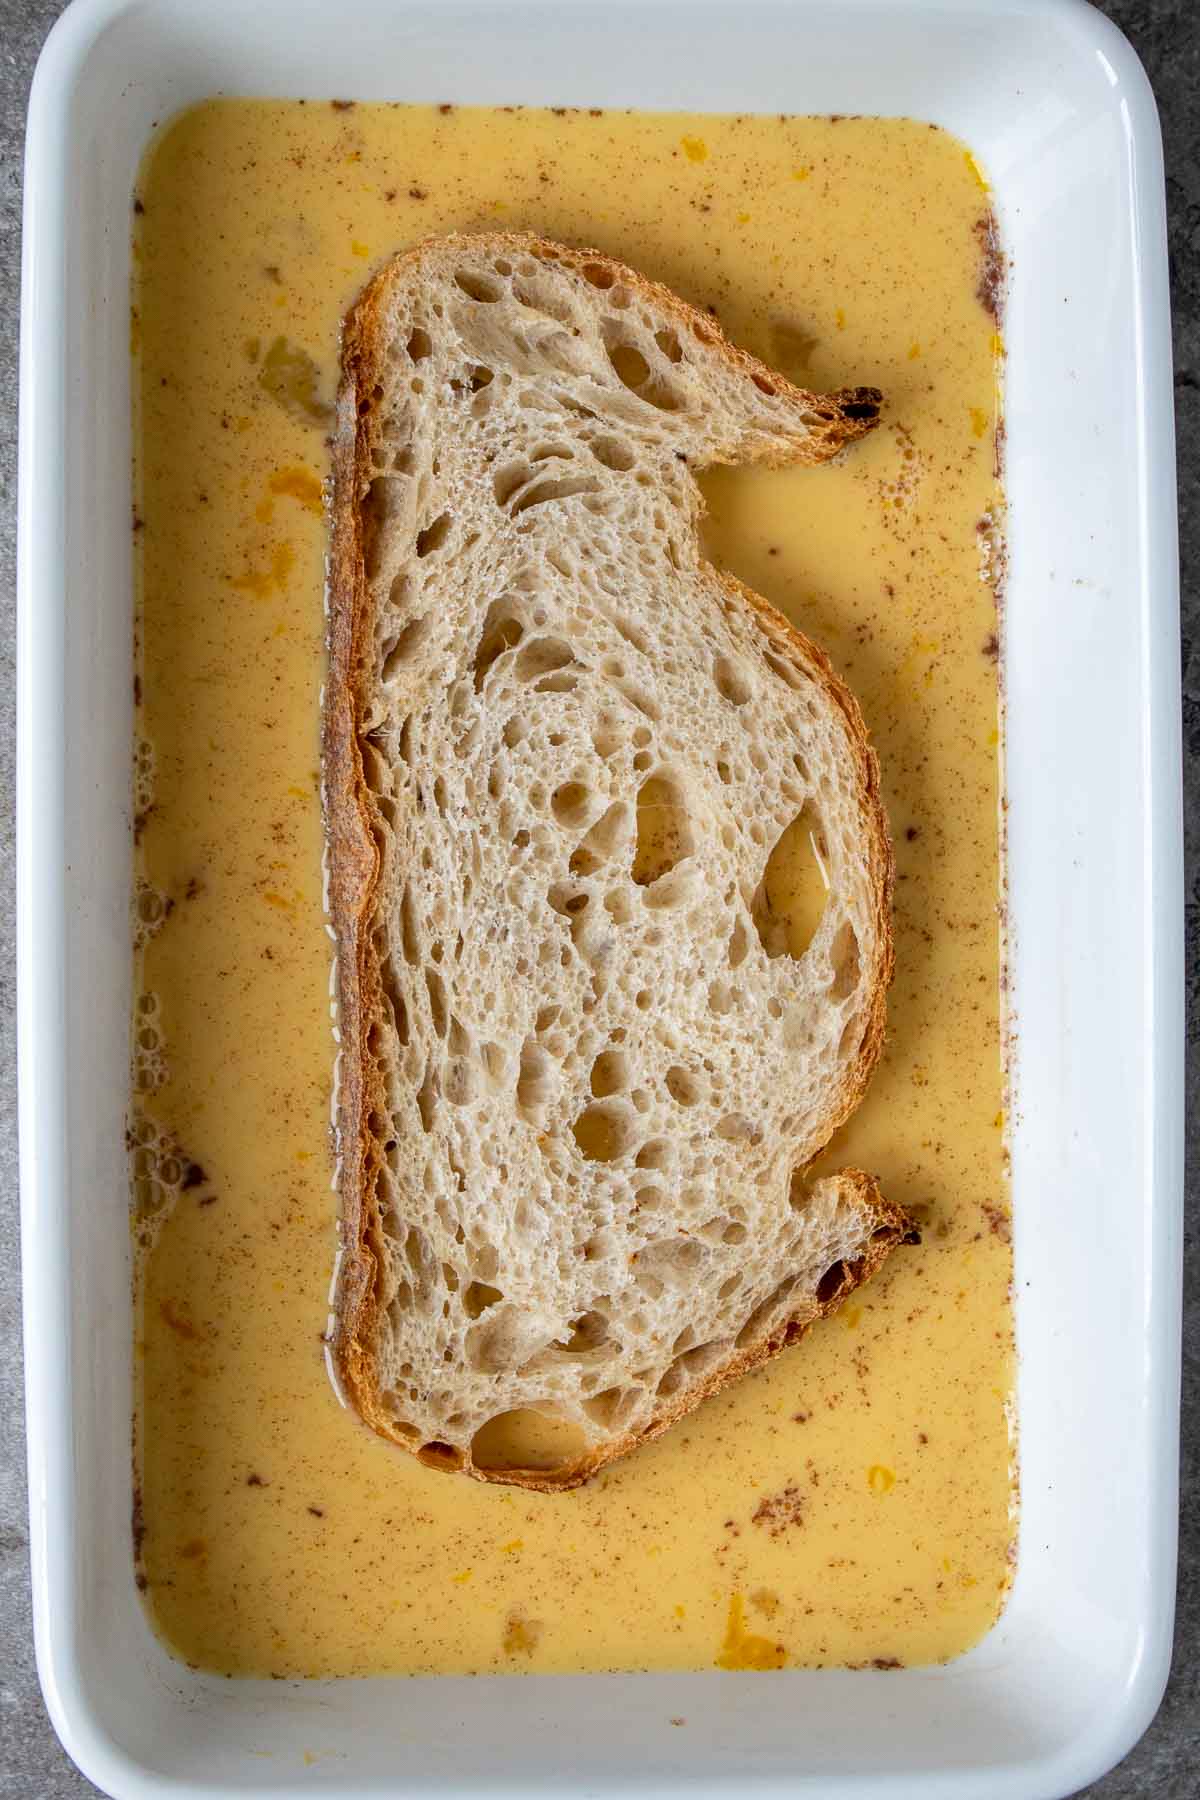 Slice of sourdough bread soaking in batter for French toast